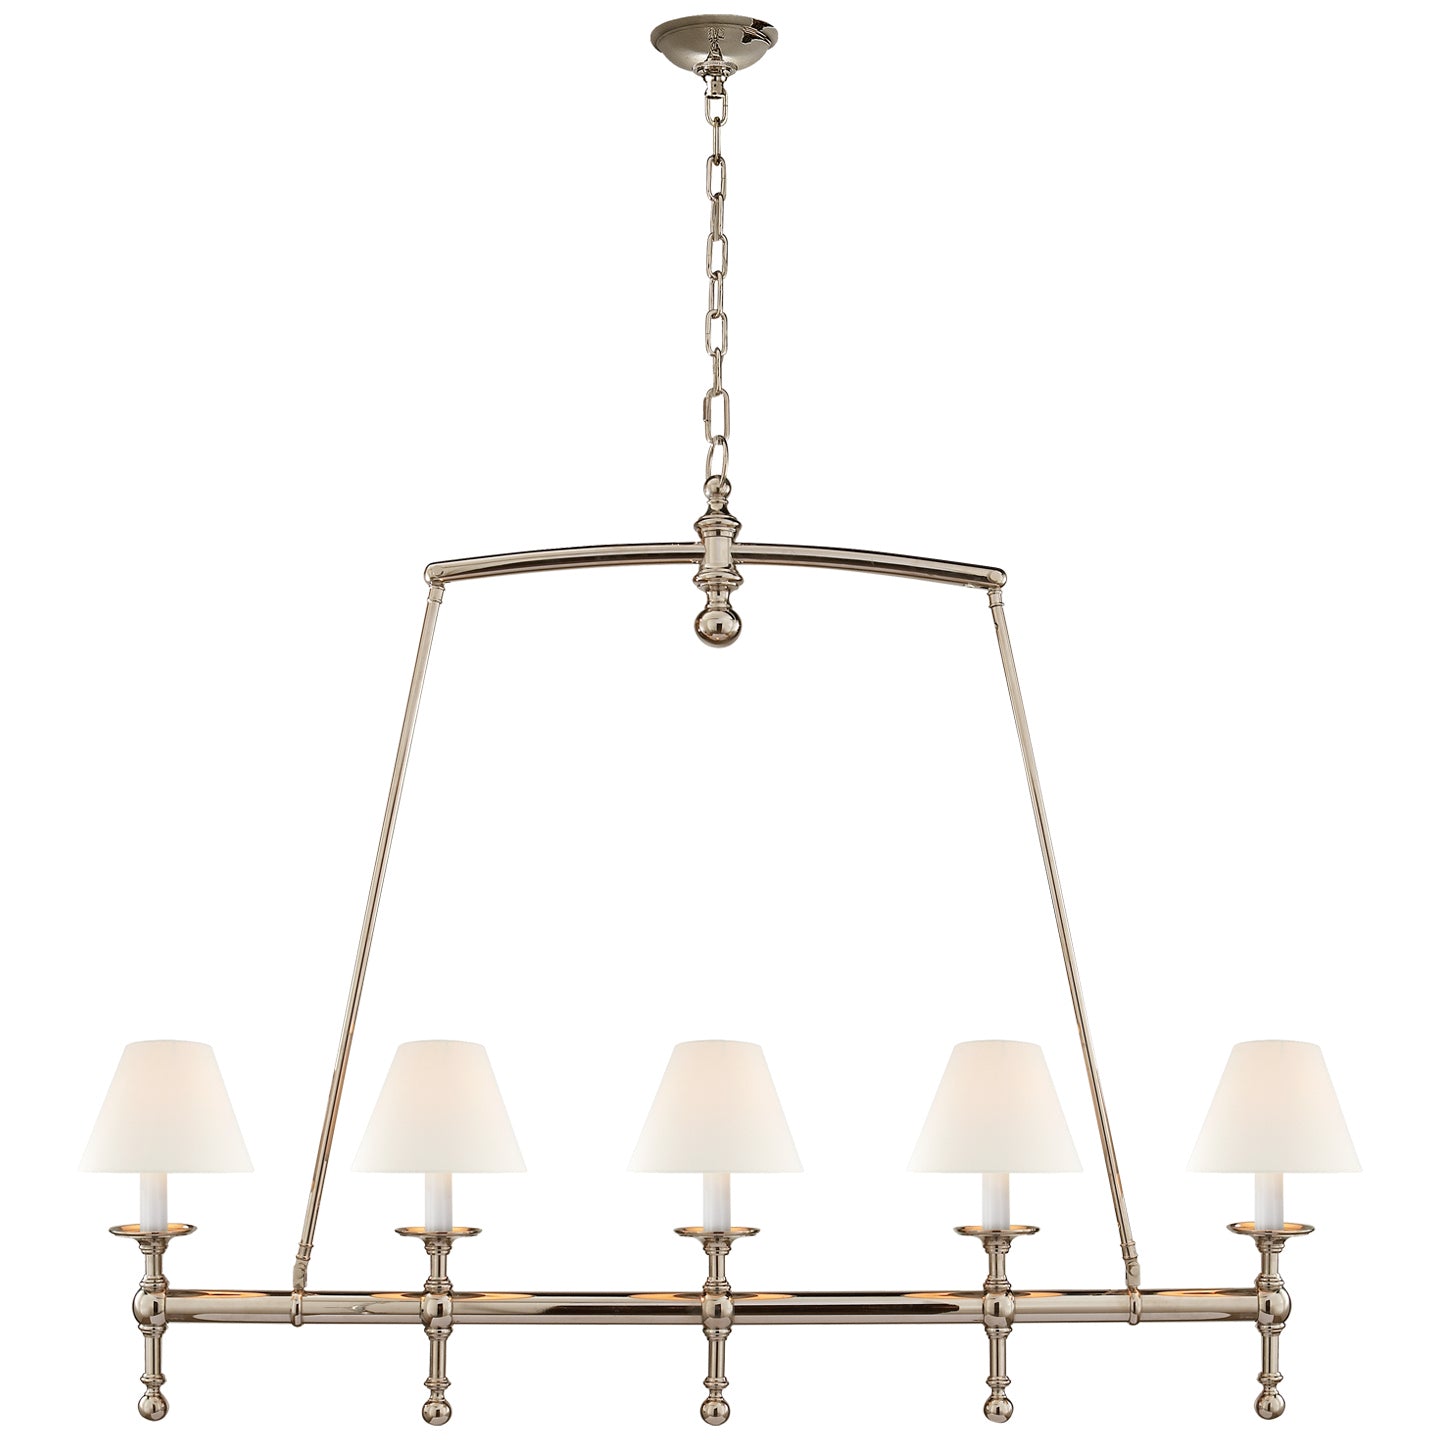 Load image into Gallery viewer, Visual Comfort Signature - SL 5811PN-L - Five Light Linear Chandelier - Classic - Polished Nickel
